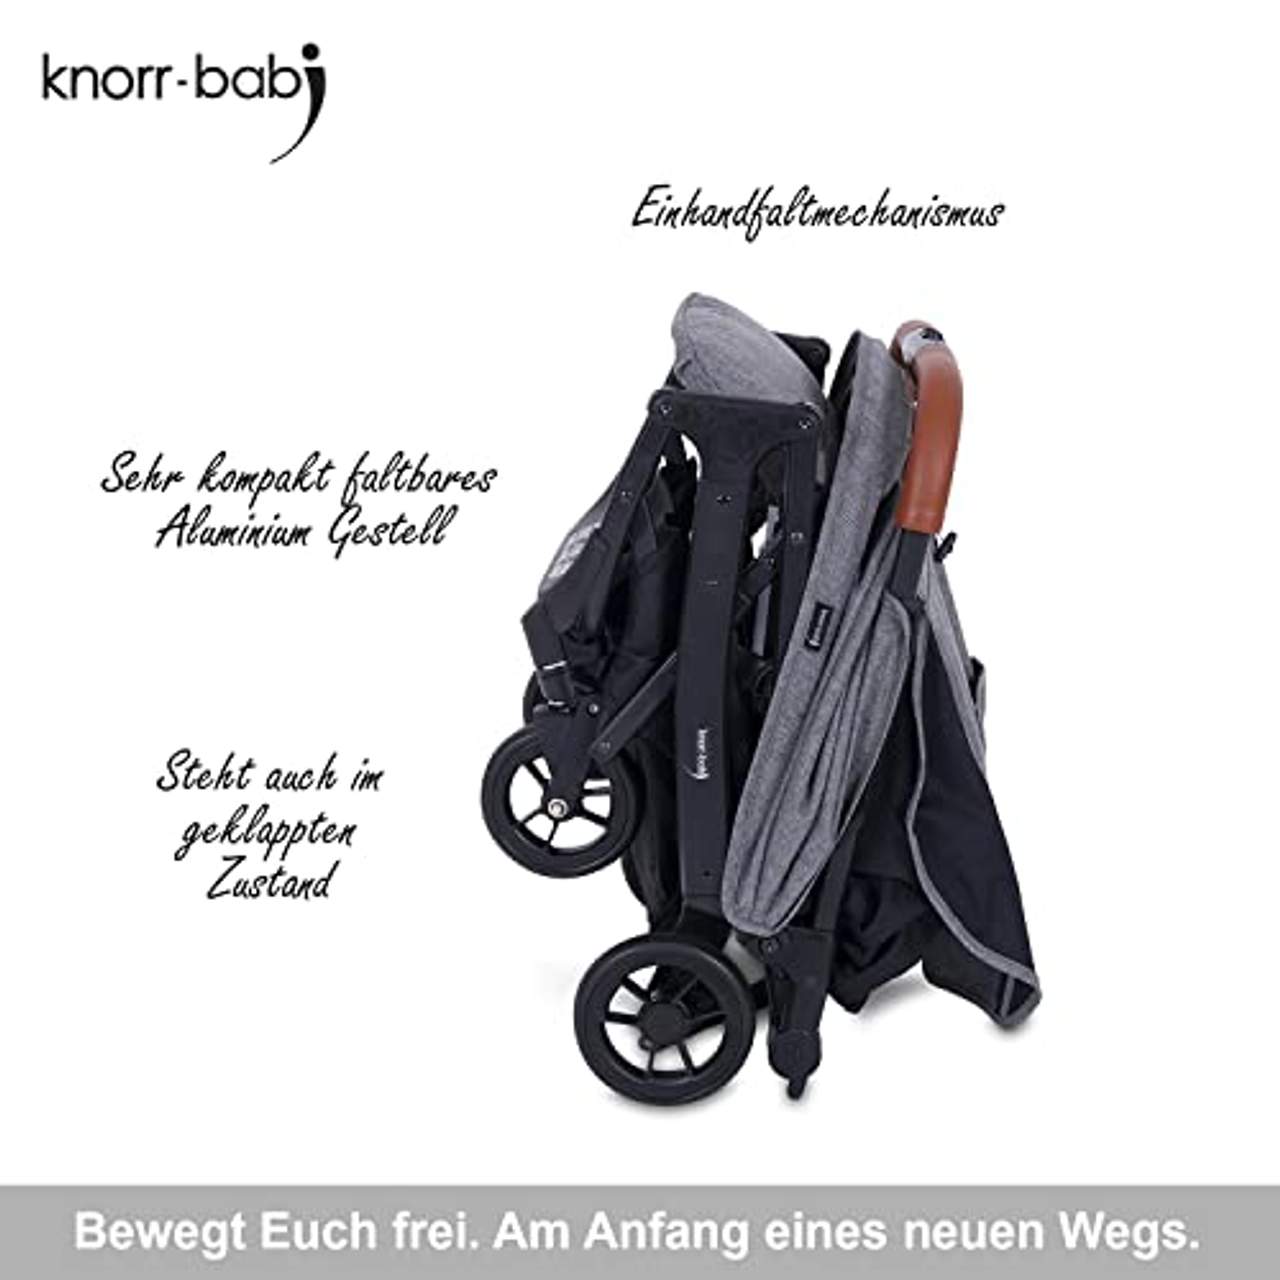 Knorr-Baby Buggy B Easy Fold